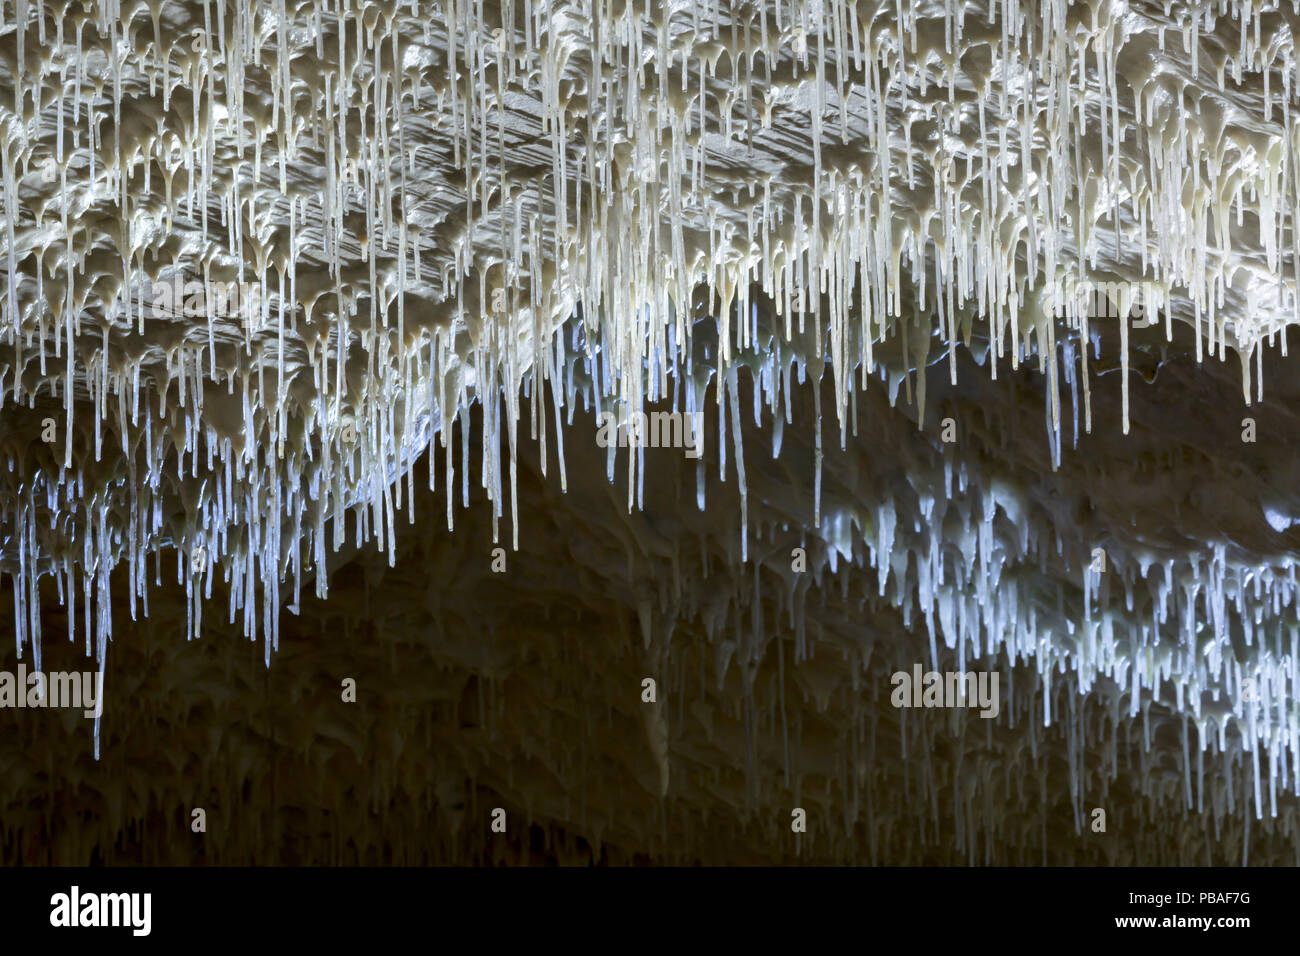 Straw or tubular stalactites which are very delicate, hollow structures. They form when calcium carbonate or calcium sulfate dissolved in the water comes out of solution and is deposited in a ring around the outside of each successive drop as it hangs from the end of the stalactite. Postojna Cave, Slovenia. April 2016. Stock Photo